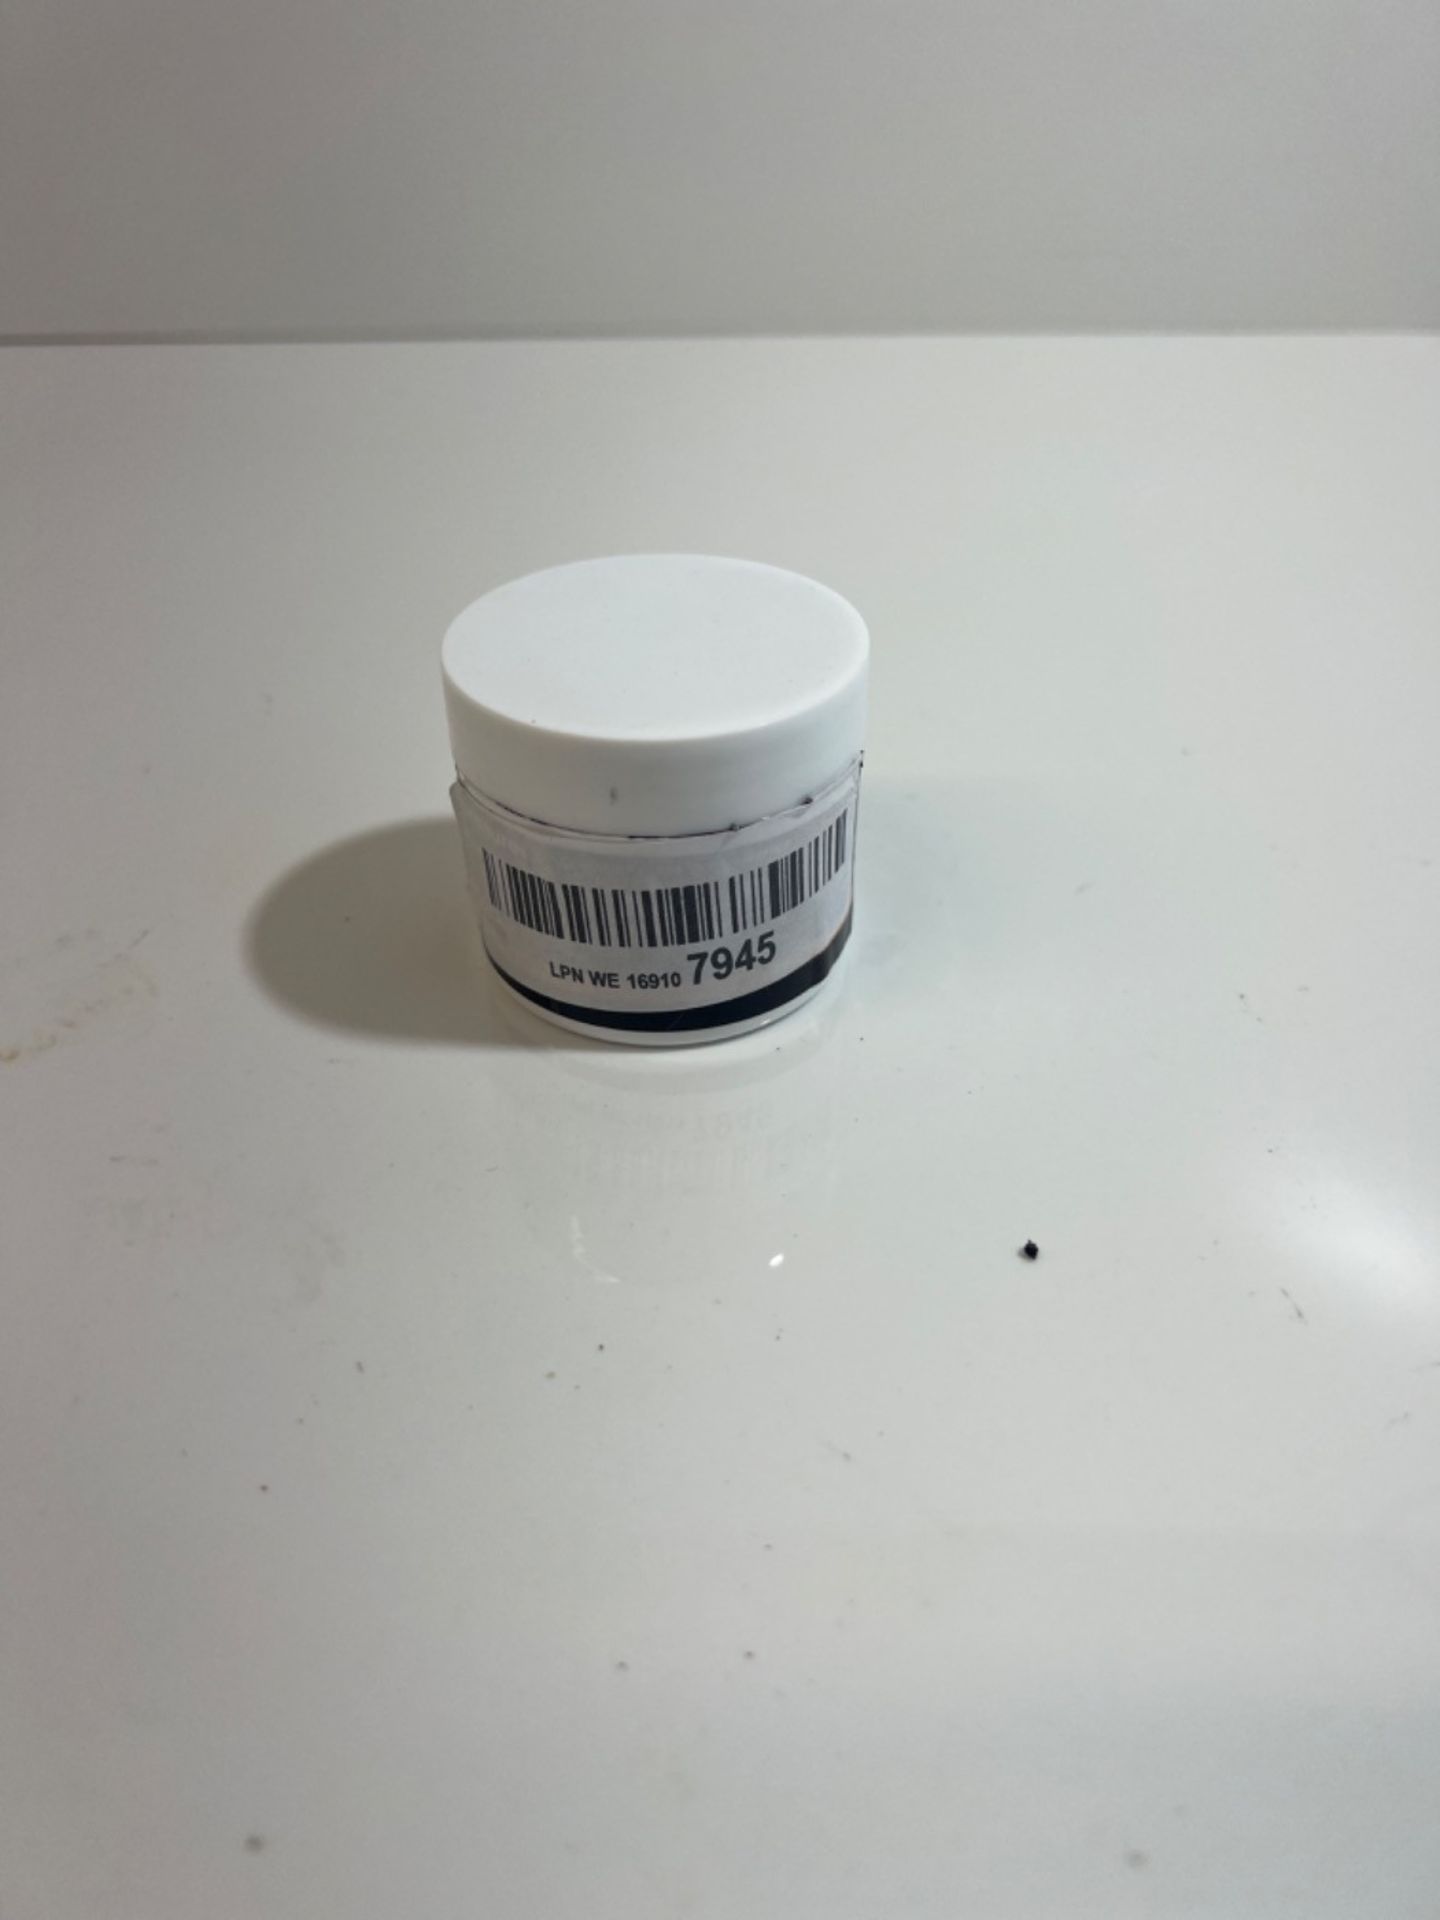 Leather Repair Filler (Black) - For Filling Holes, Scuffs, Scratches, Cracking Etc - Heavy Filler - - Image 2 of 3